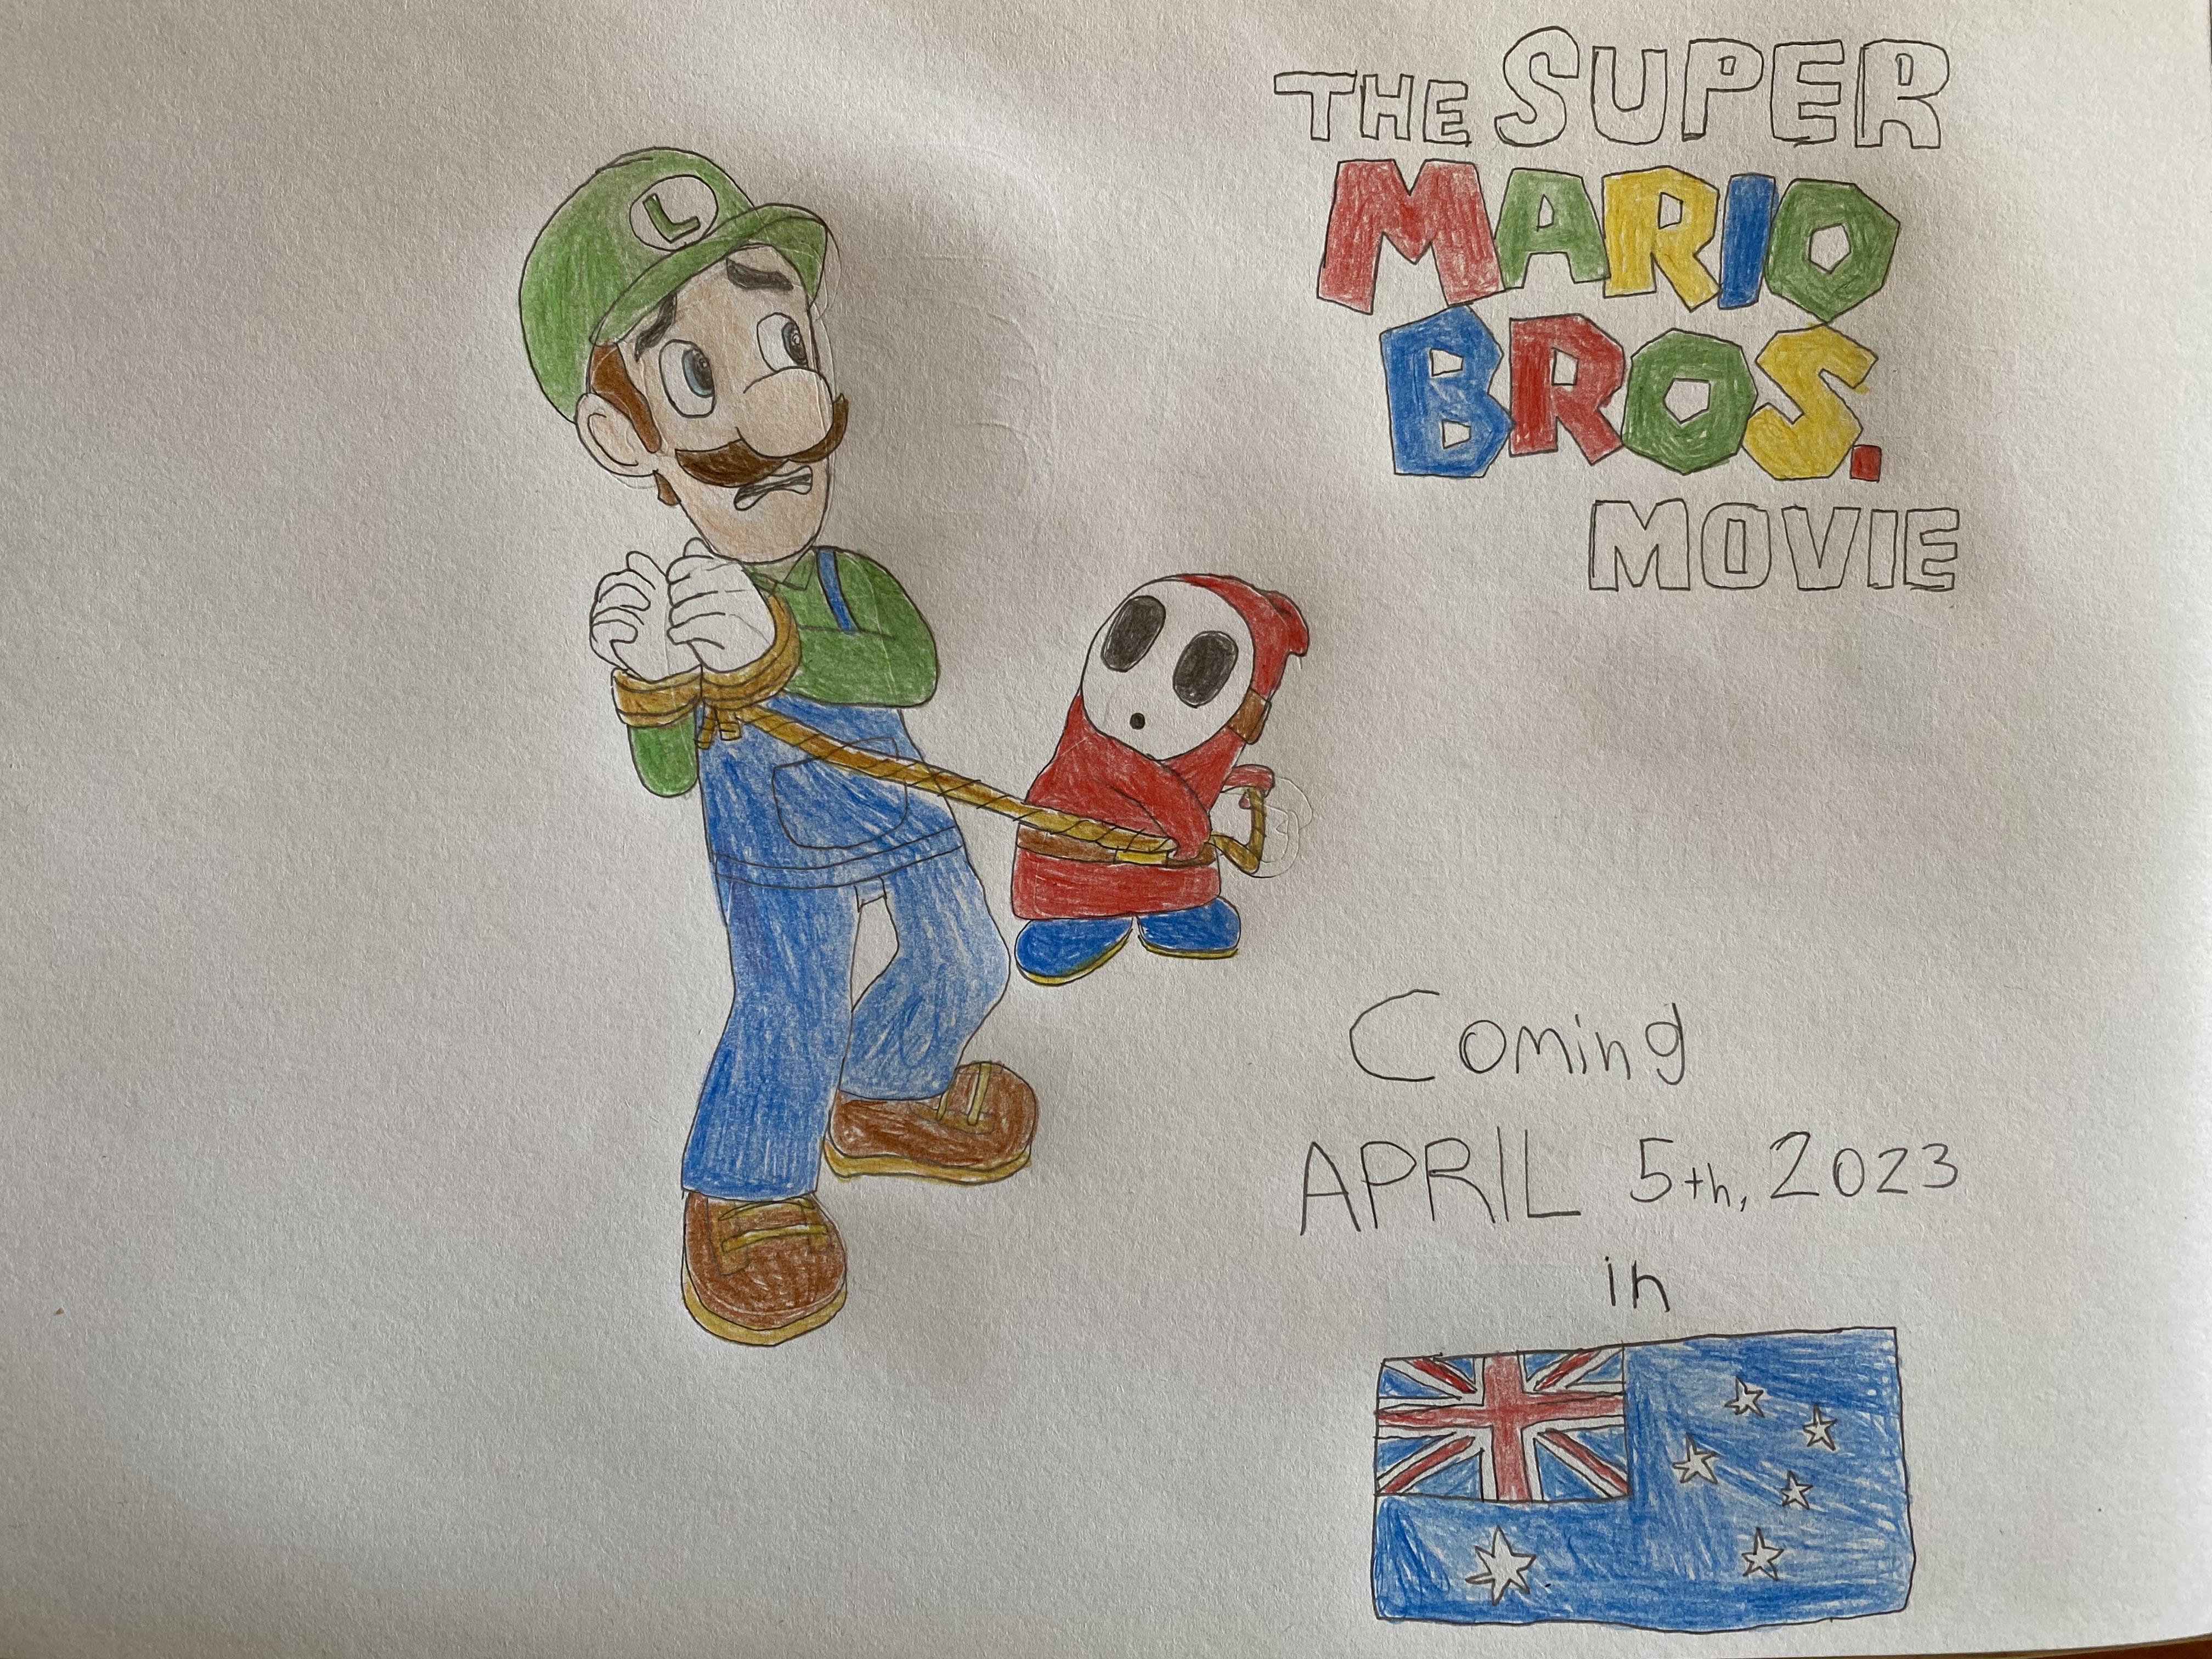 The Super Mario Bros. Movie 2 Poster by foodismycoolestRBLX on DeviantArt